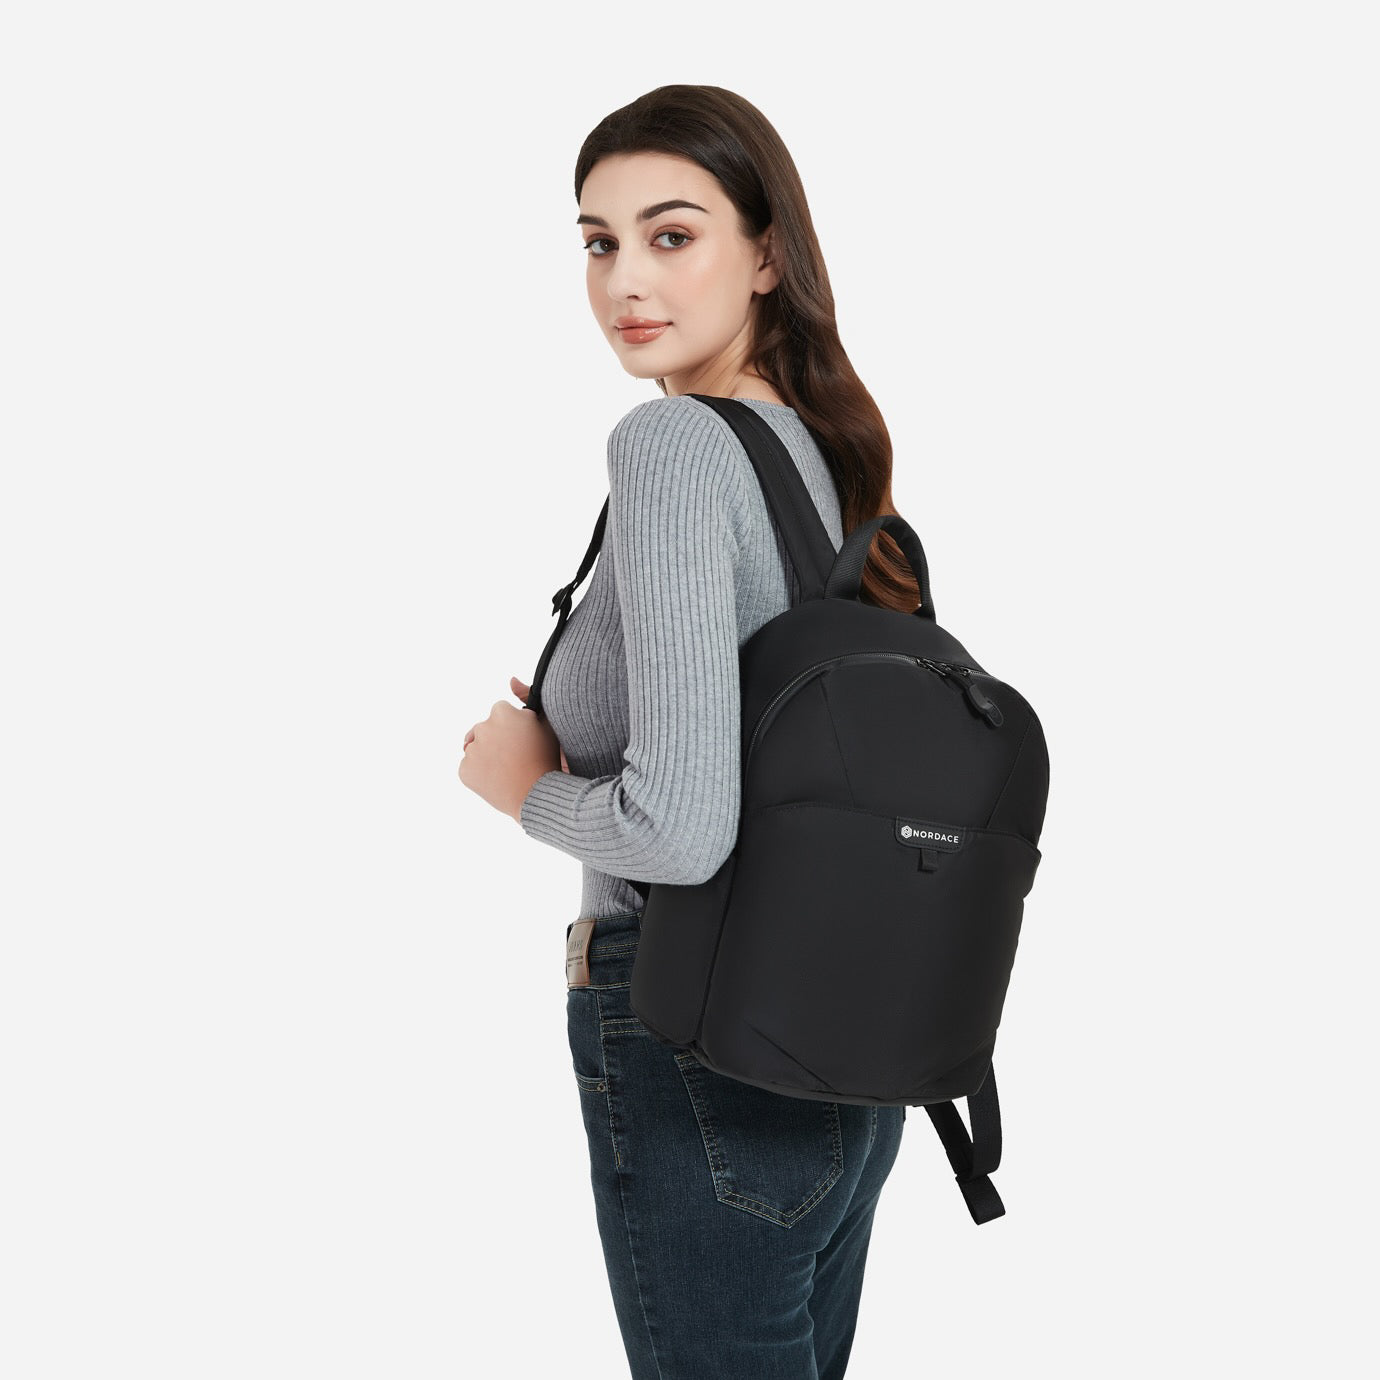 Nordace Aerial Infinity Mini Backpack 迷你智能背包